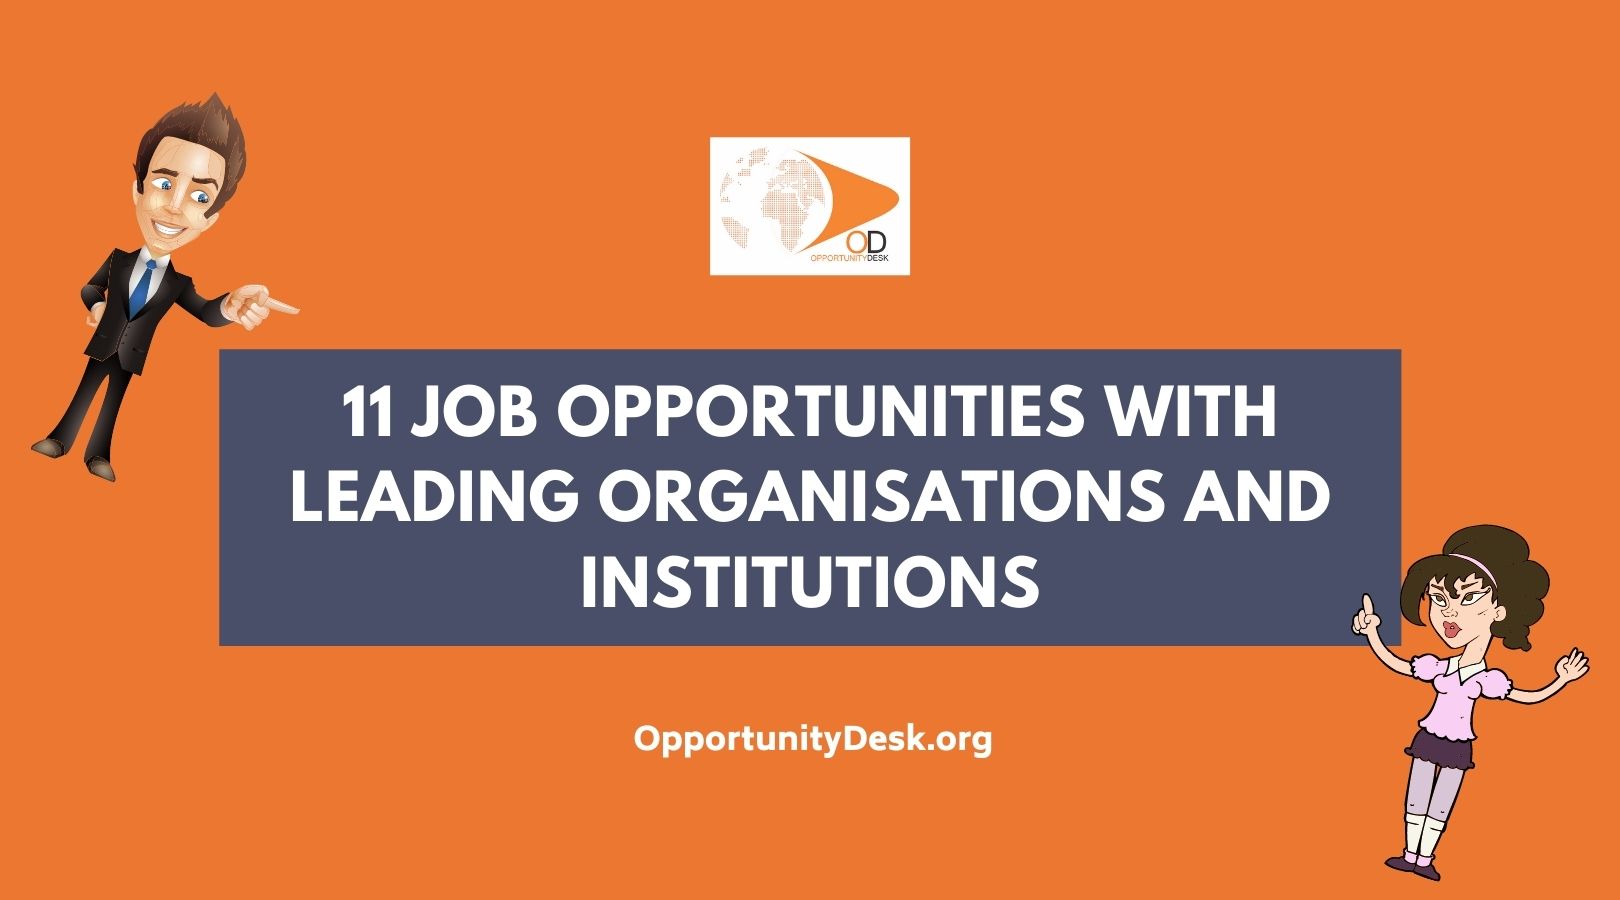 11 Job Opportunities with Leading Organisations and Institutions